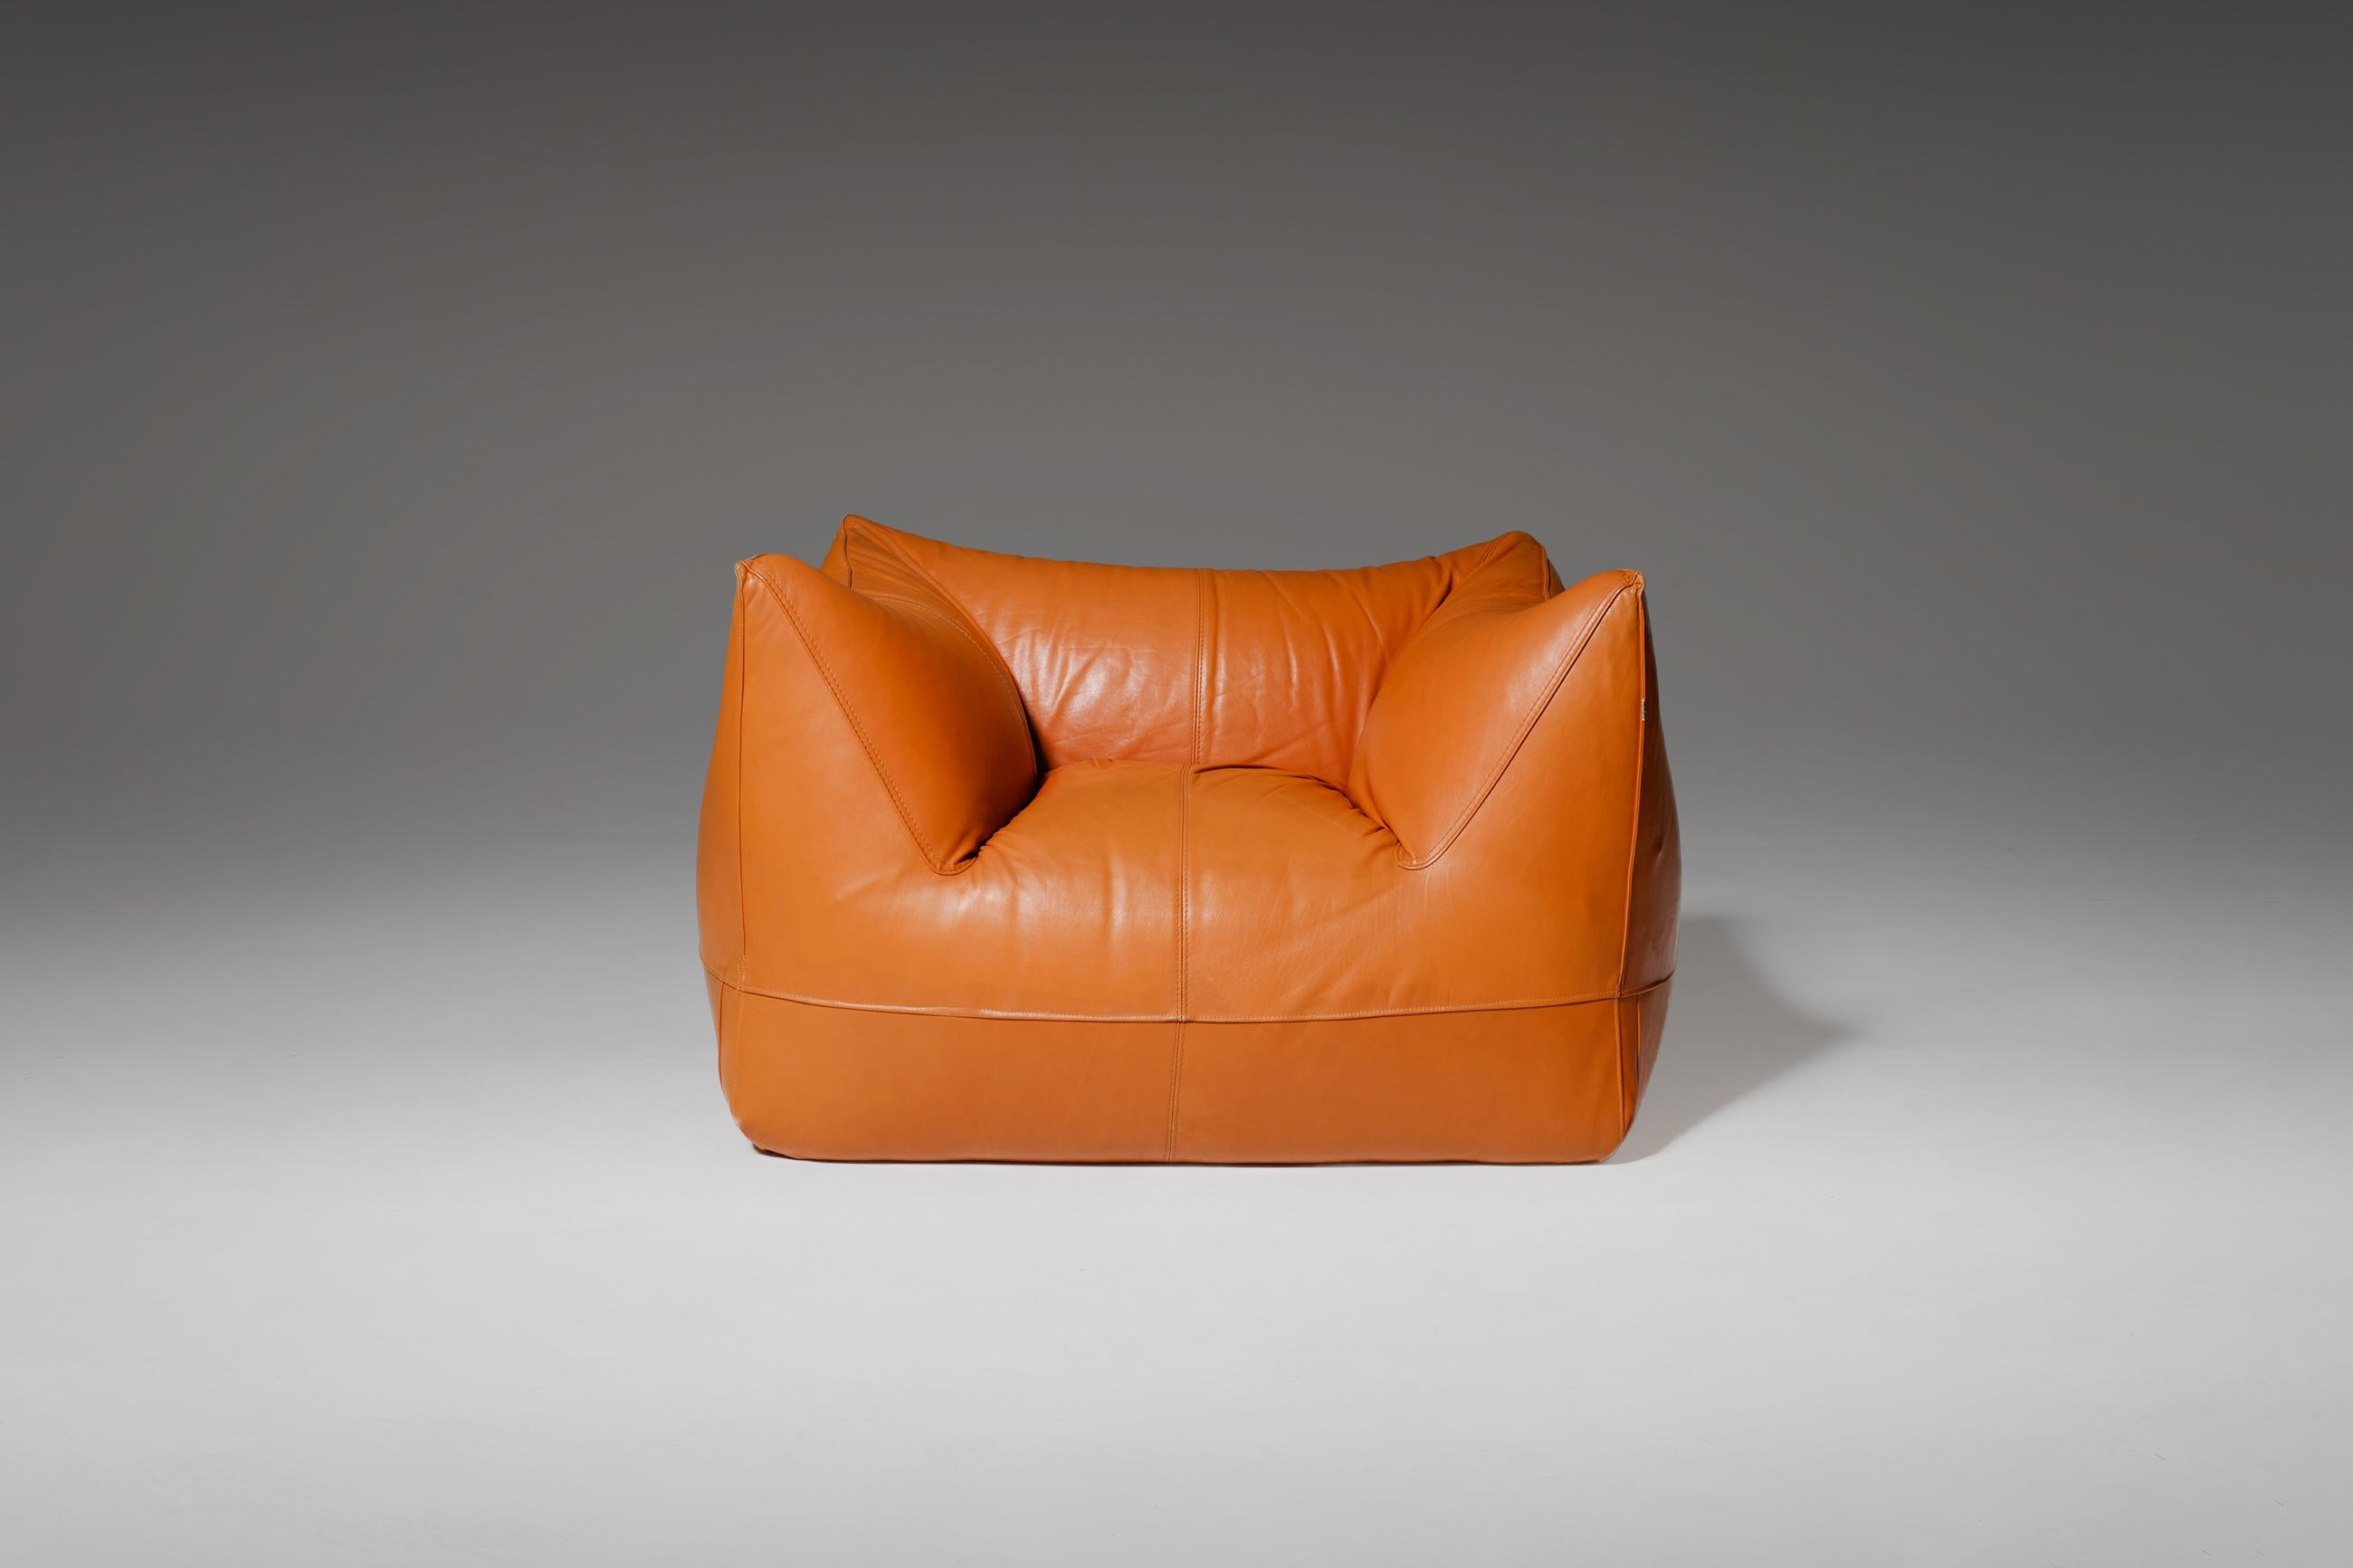 Stunning ‘Le Bambole’ lounge chair by Mario Bellini for B&B Italia, Italy 1972. Early edition with original cognac colored leather and foam in an excellent condition; marked with the B&B label. Designed as if it were a cushion, resulting in a